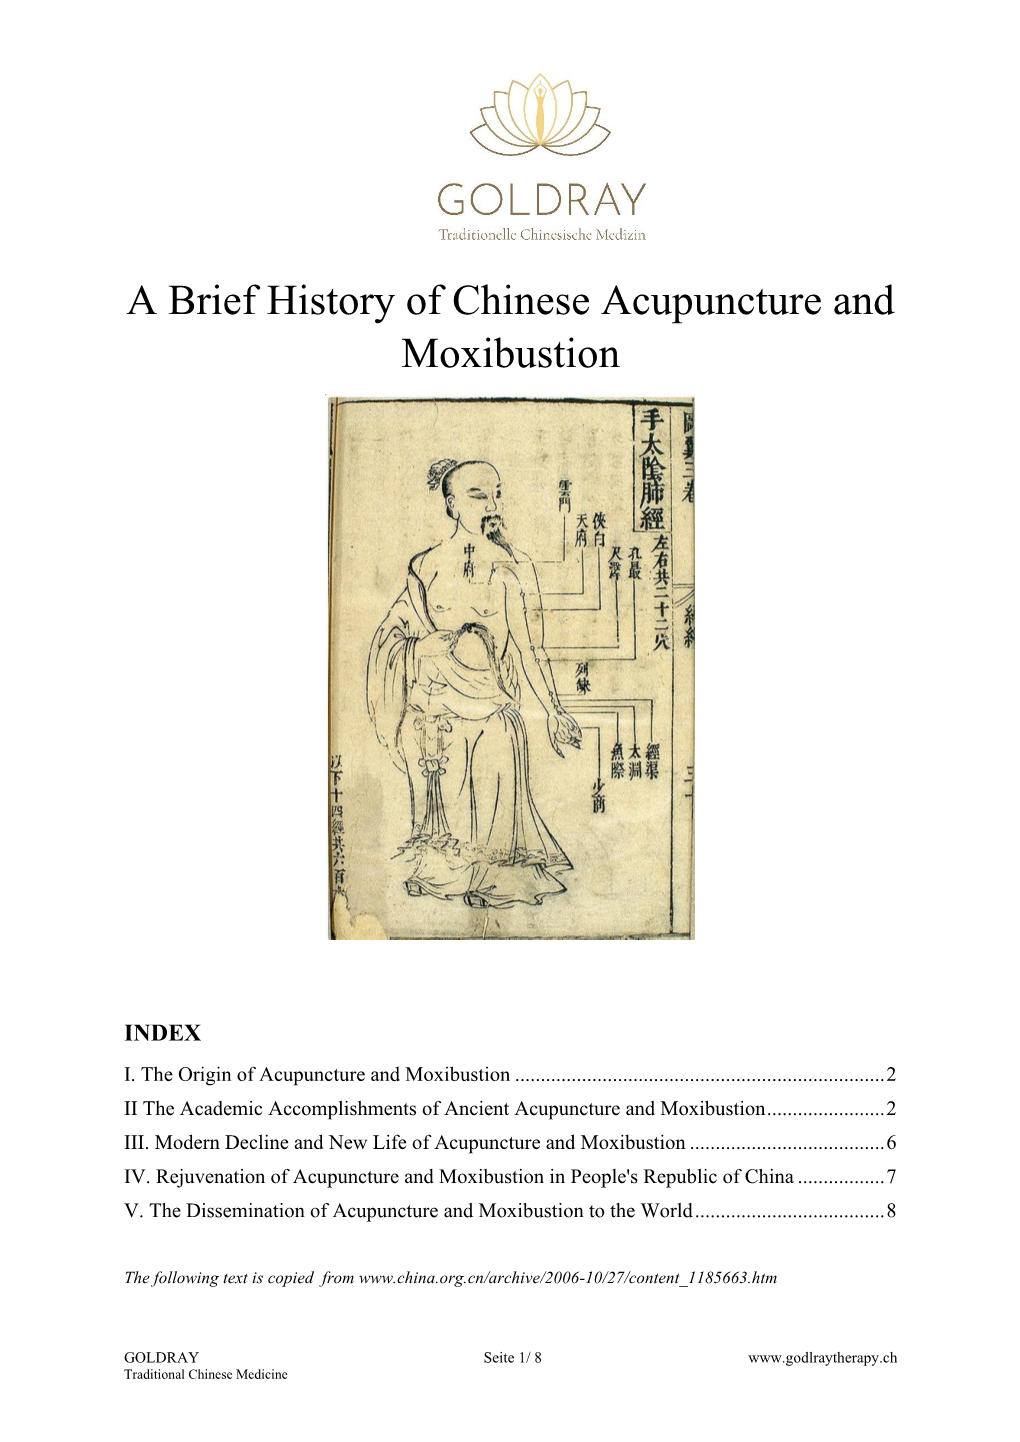 A Brief History of Chinese Acupuncture and Moxibustion